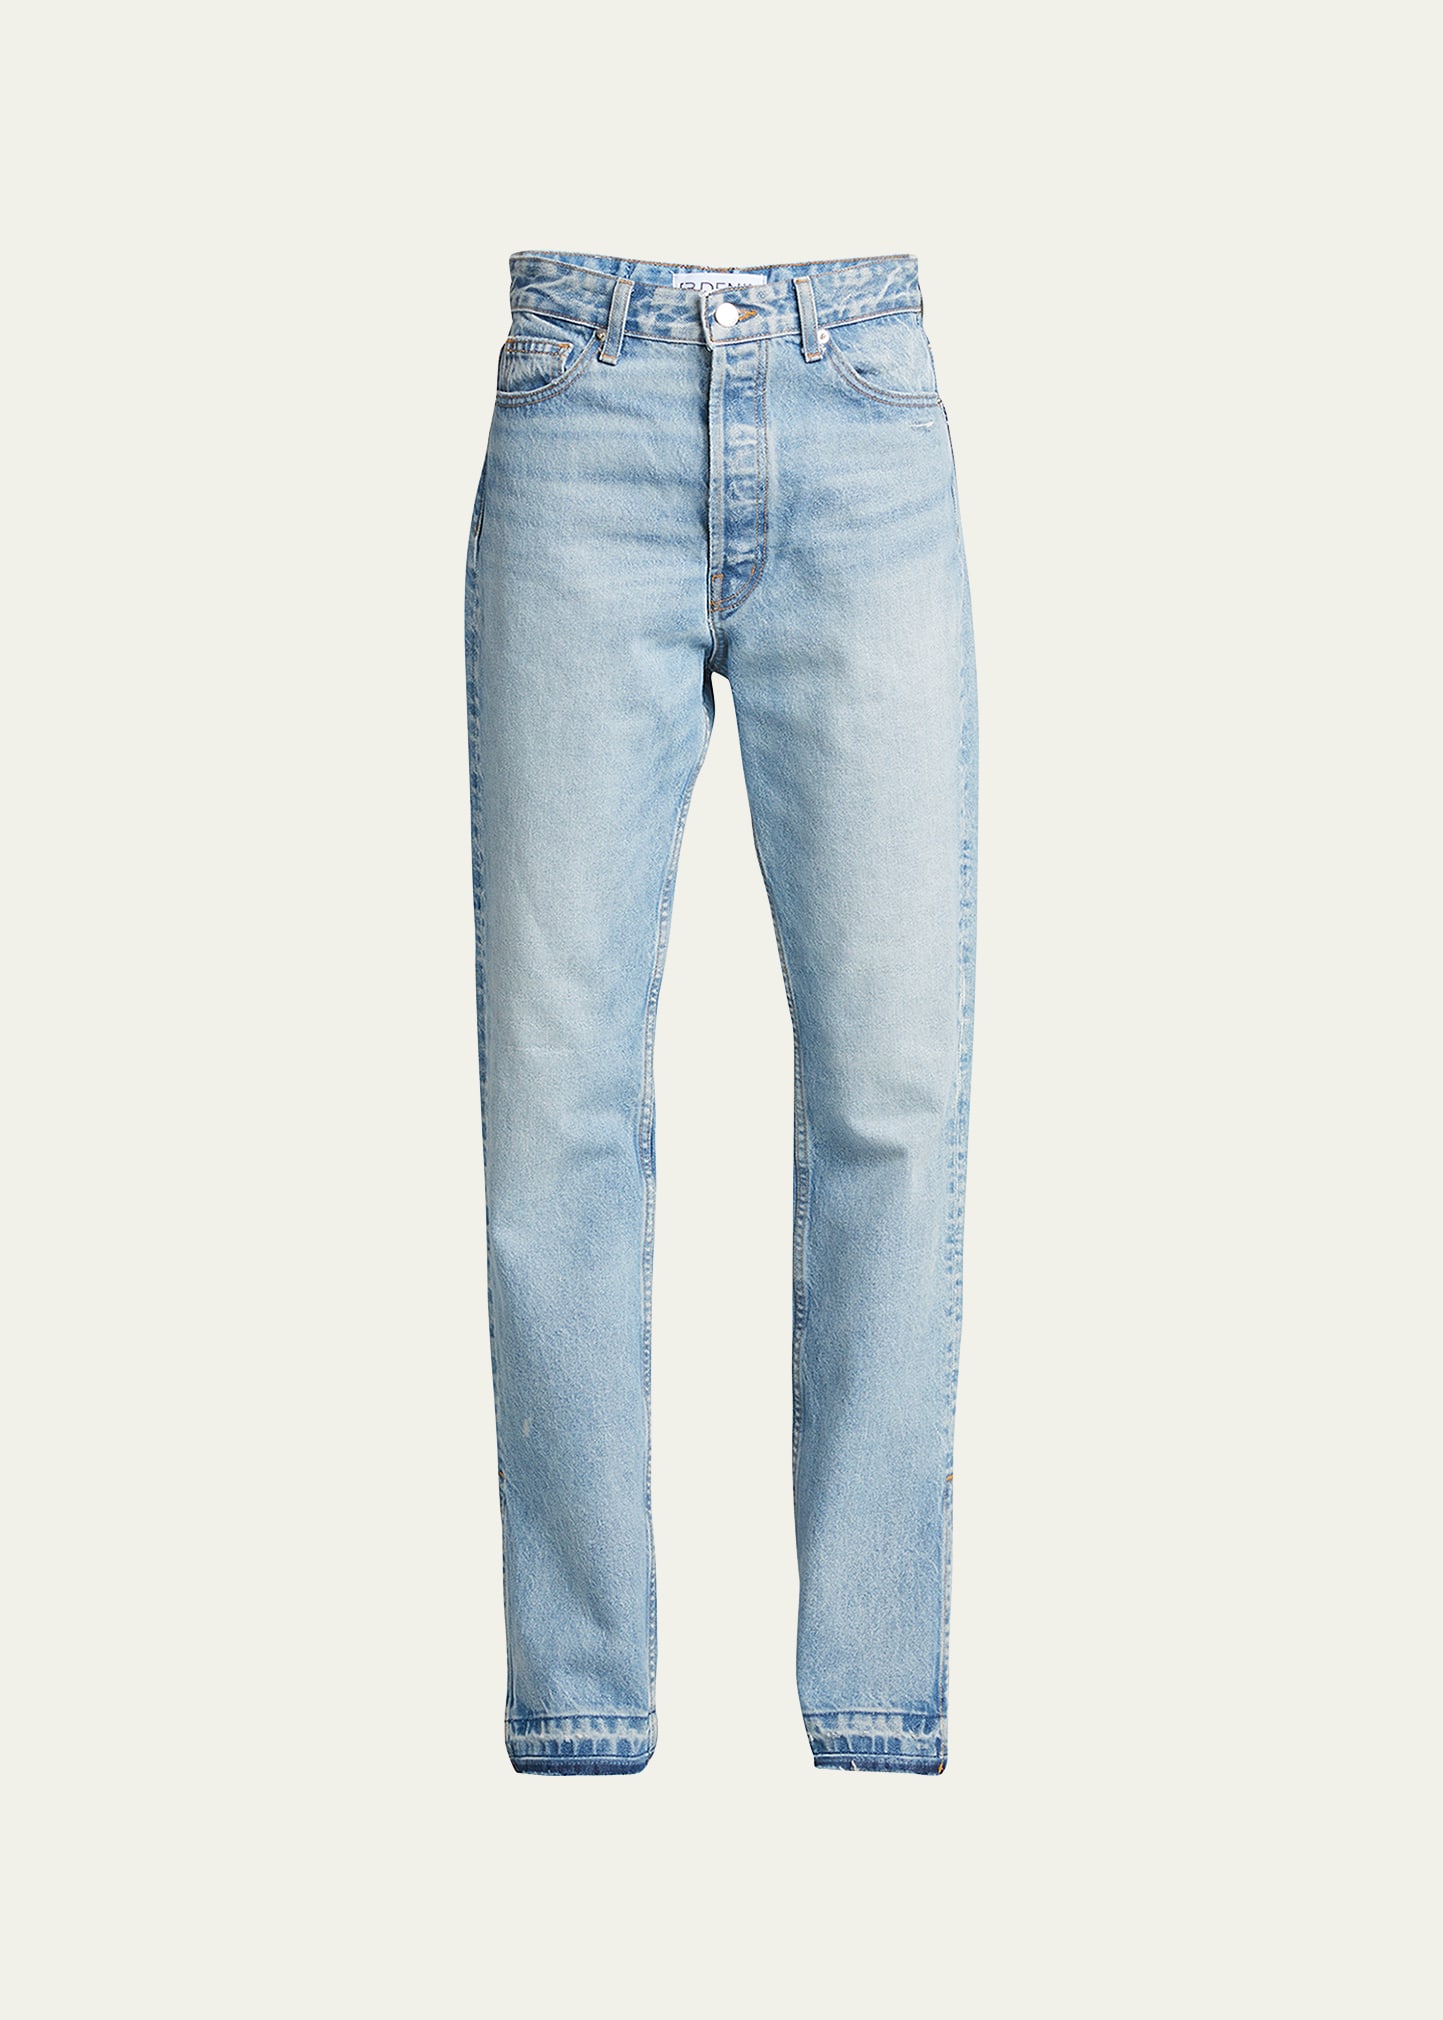 EB DENIM Unraveled Two Jeans